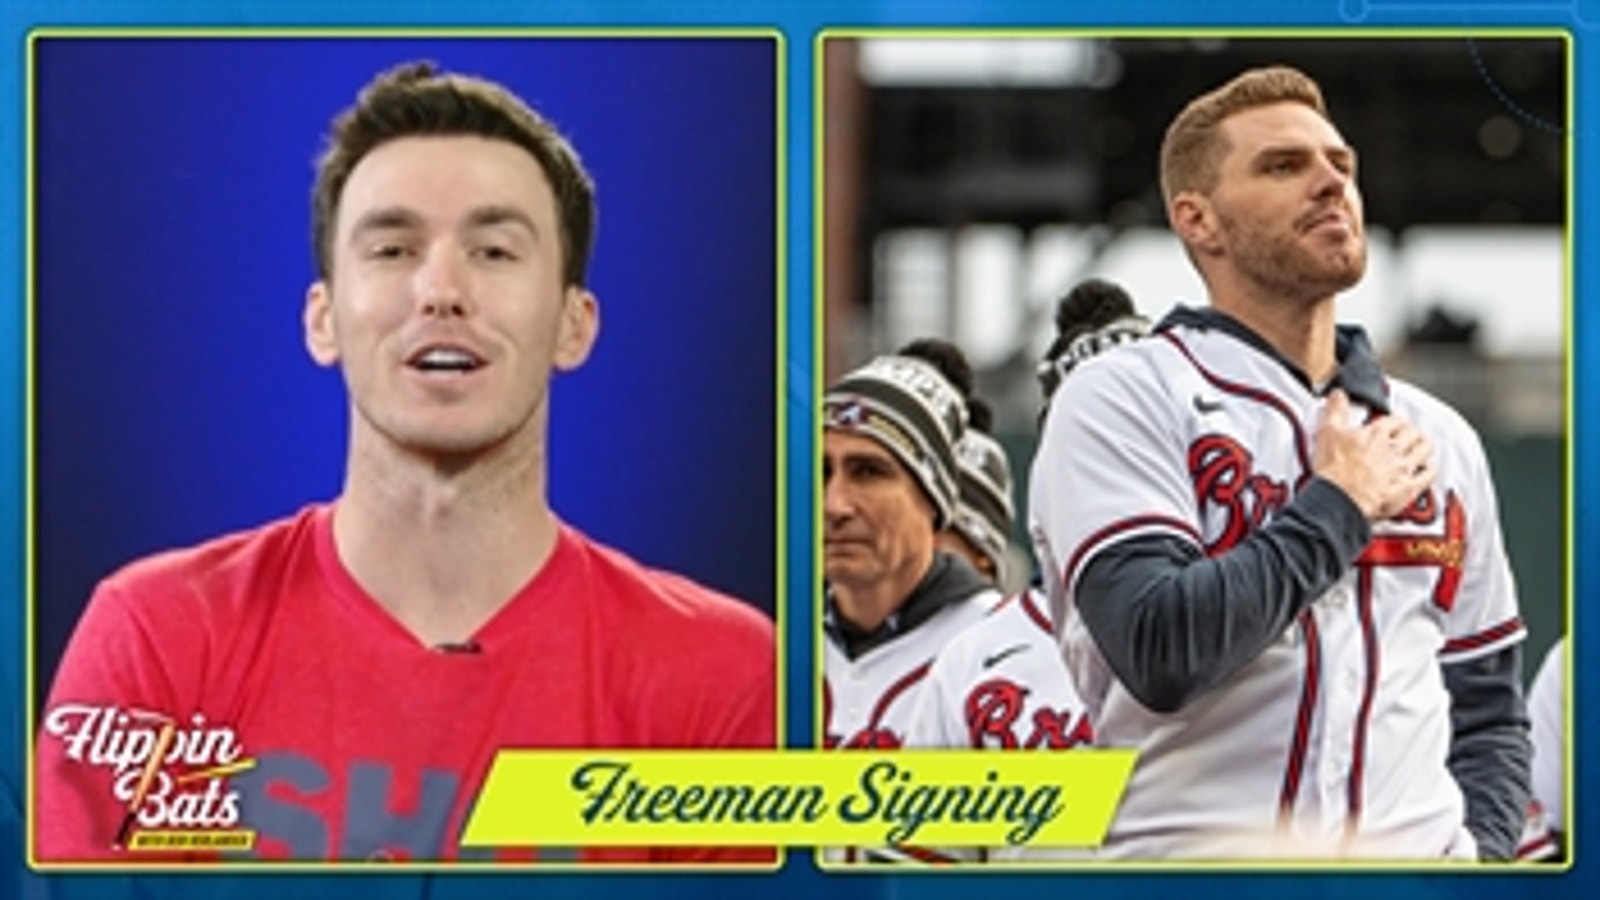 Bob Nightengale on where the Braves' Freddie Freeman will sign: Dodgers, Braves or Yankees?